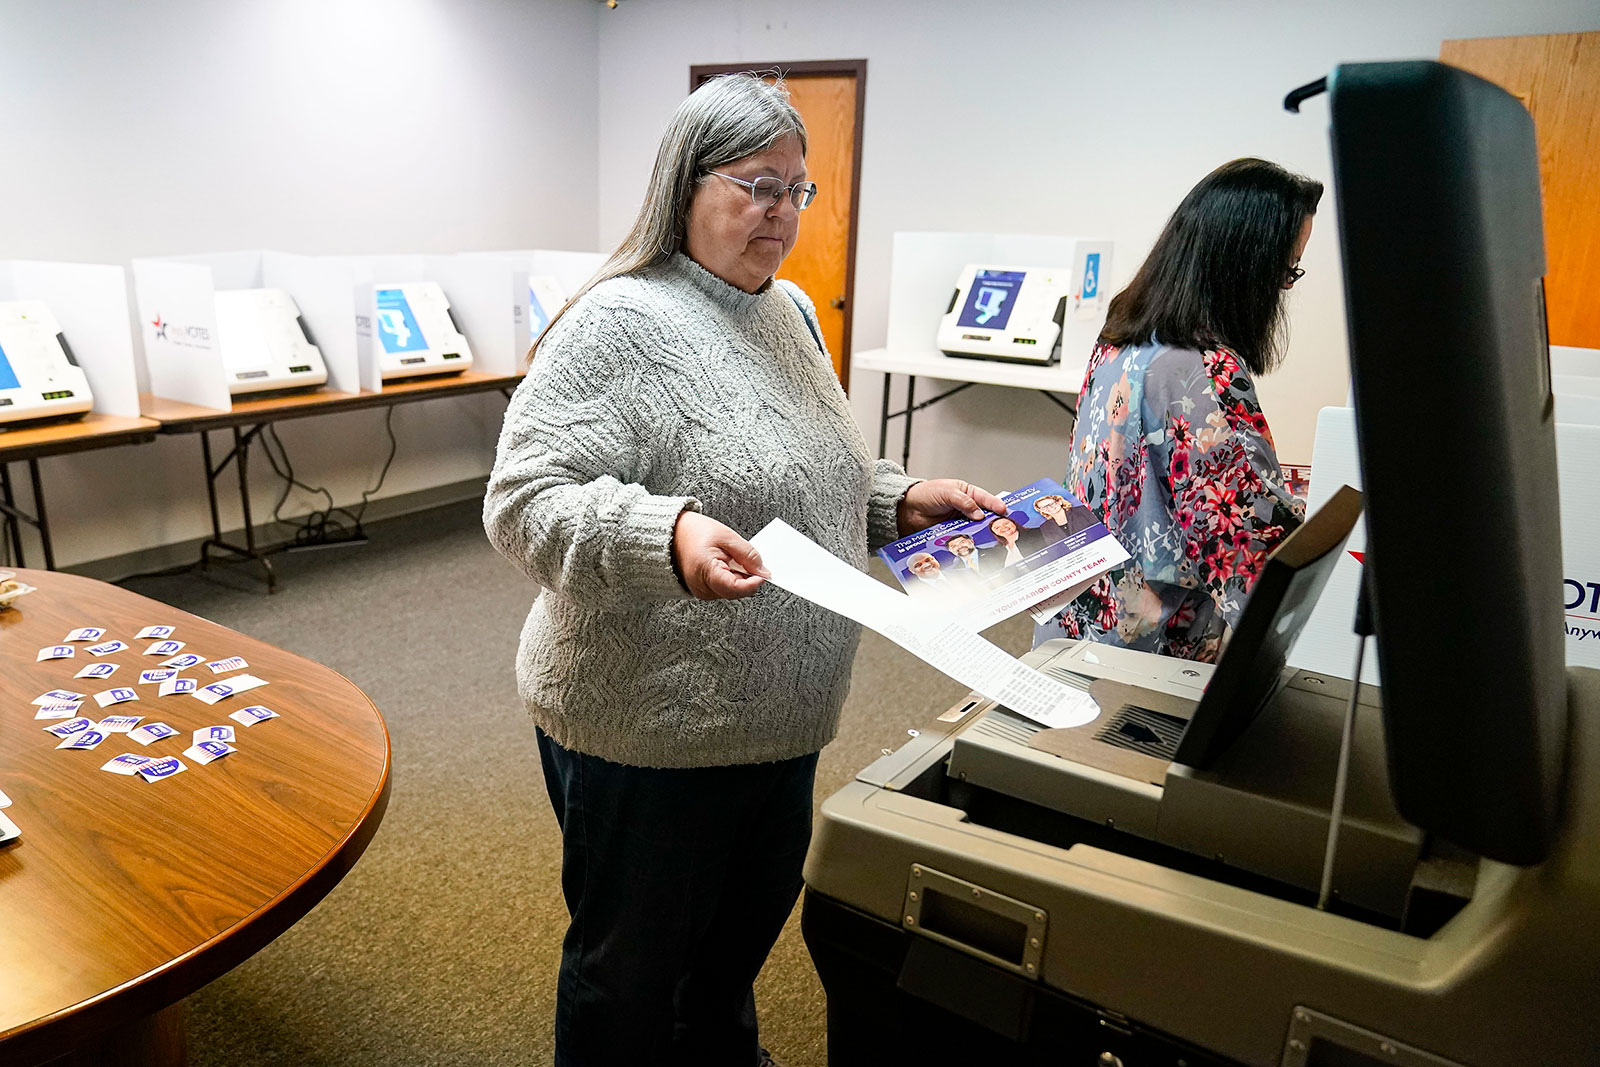 A voter inserts her ballot into a scanner as she votes in the primary election in Indianapolis, Indiana, on Tuesday, May 3.